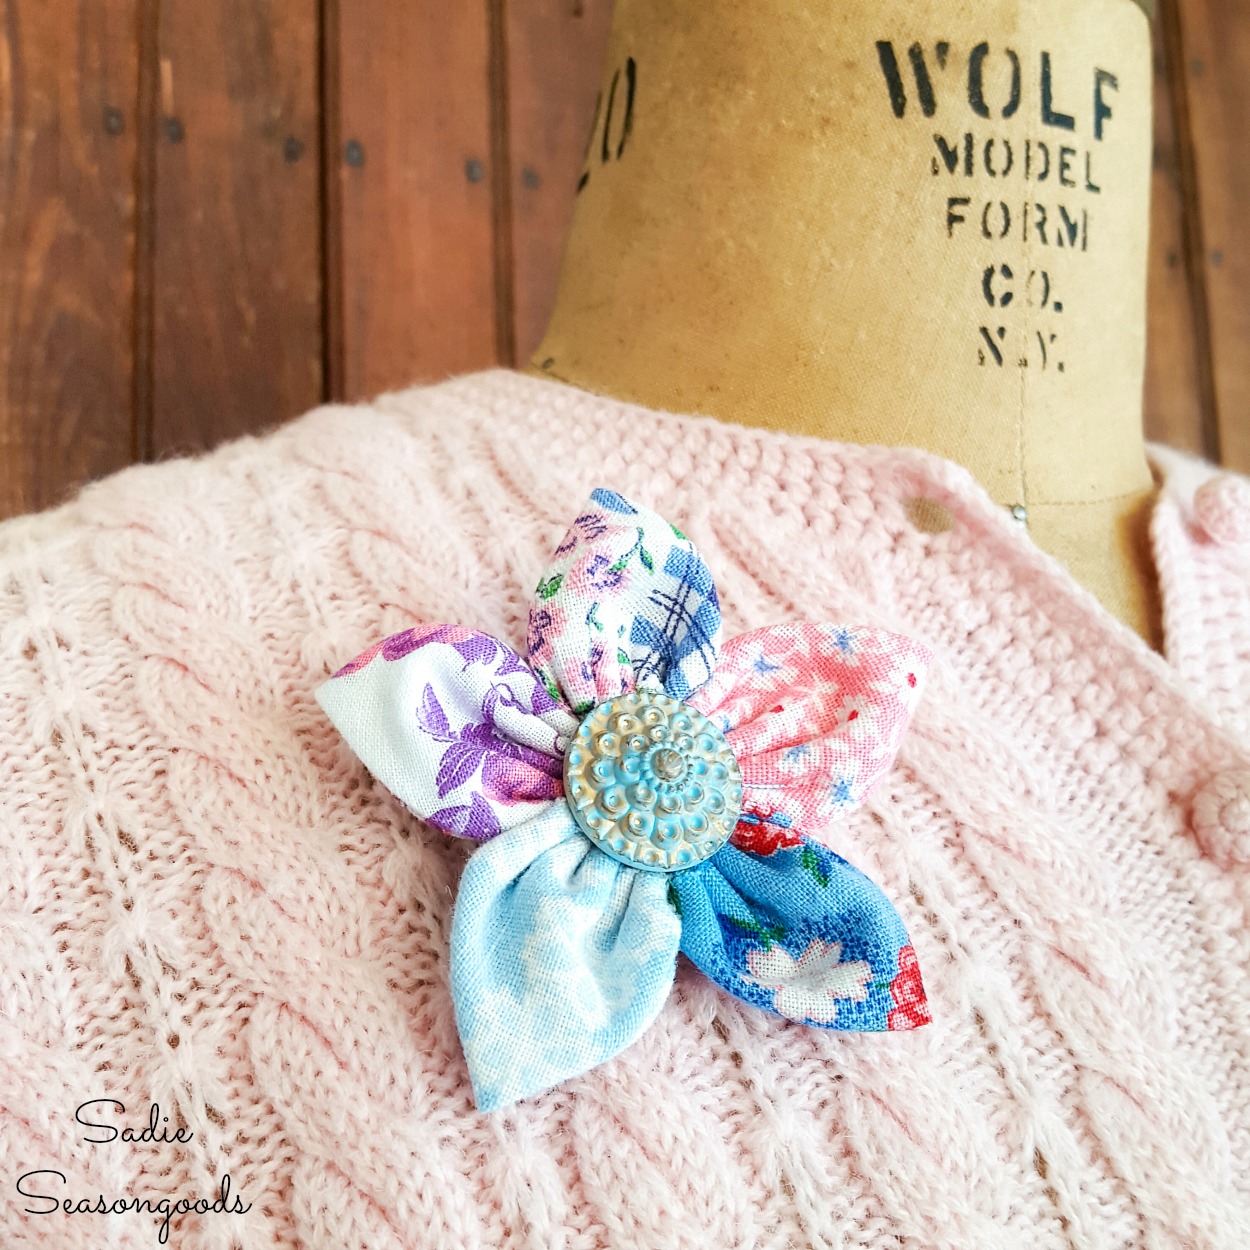 Upcycling Antique Brooches and Stick Pins: A Creative and